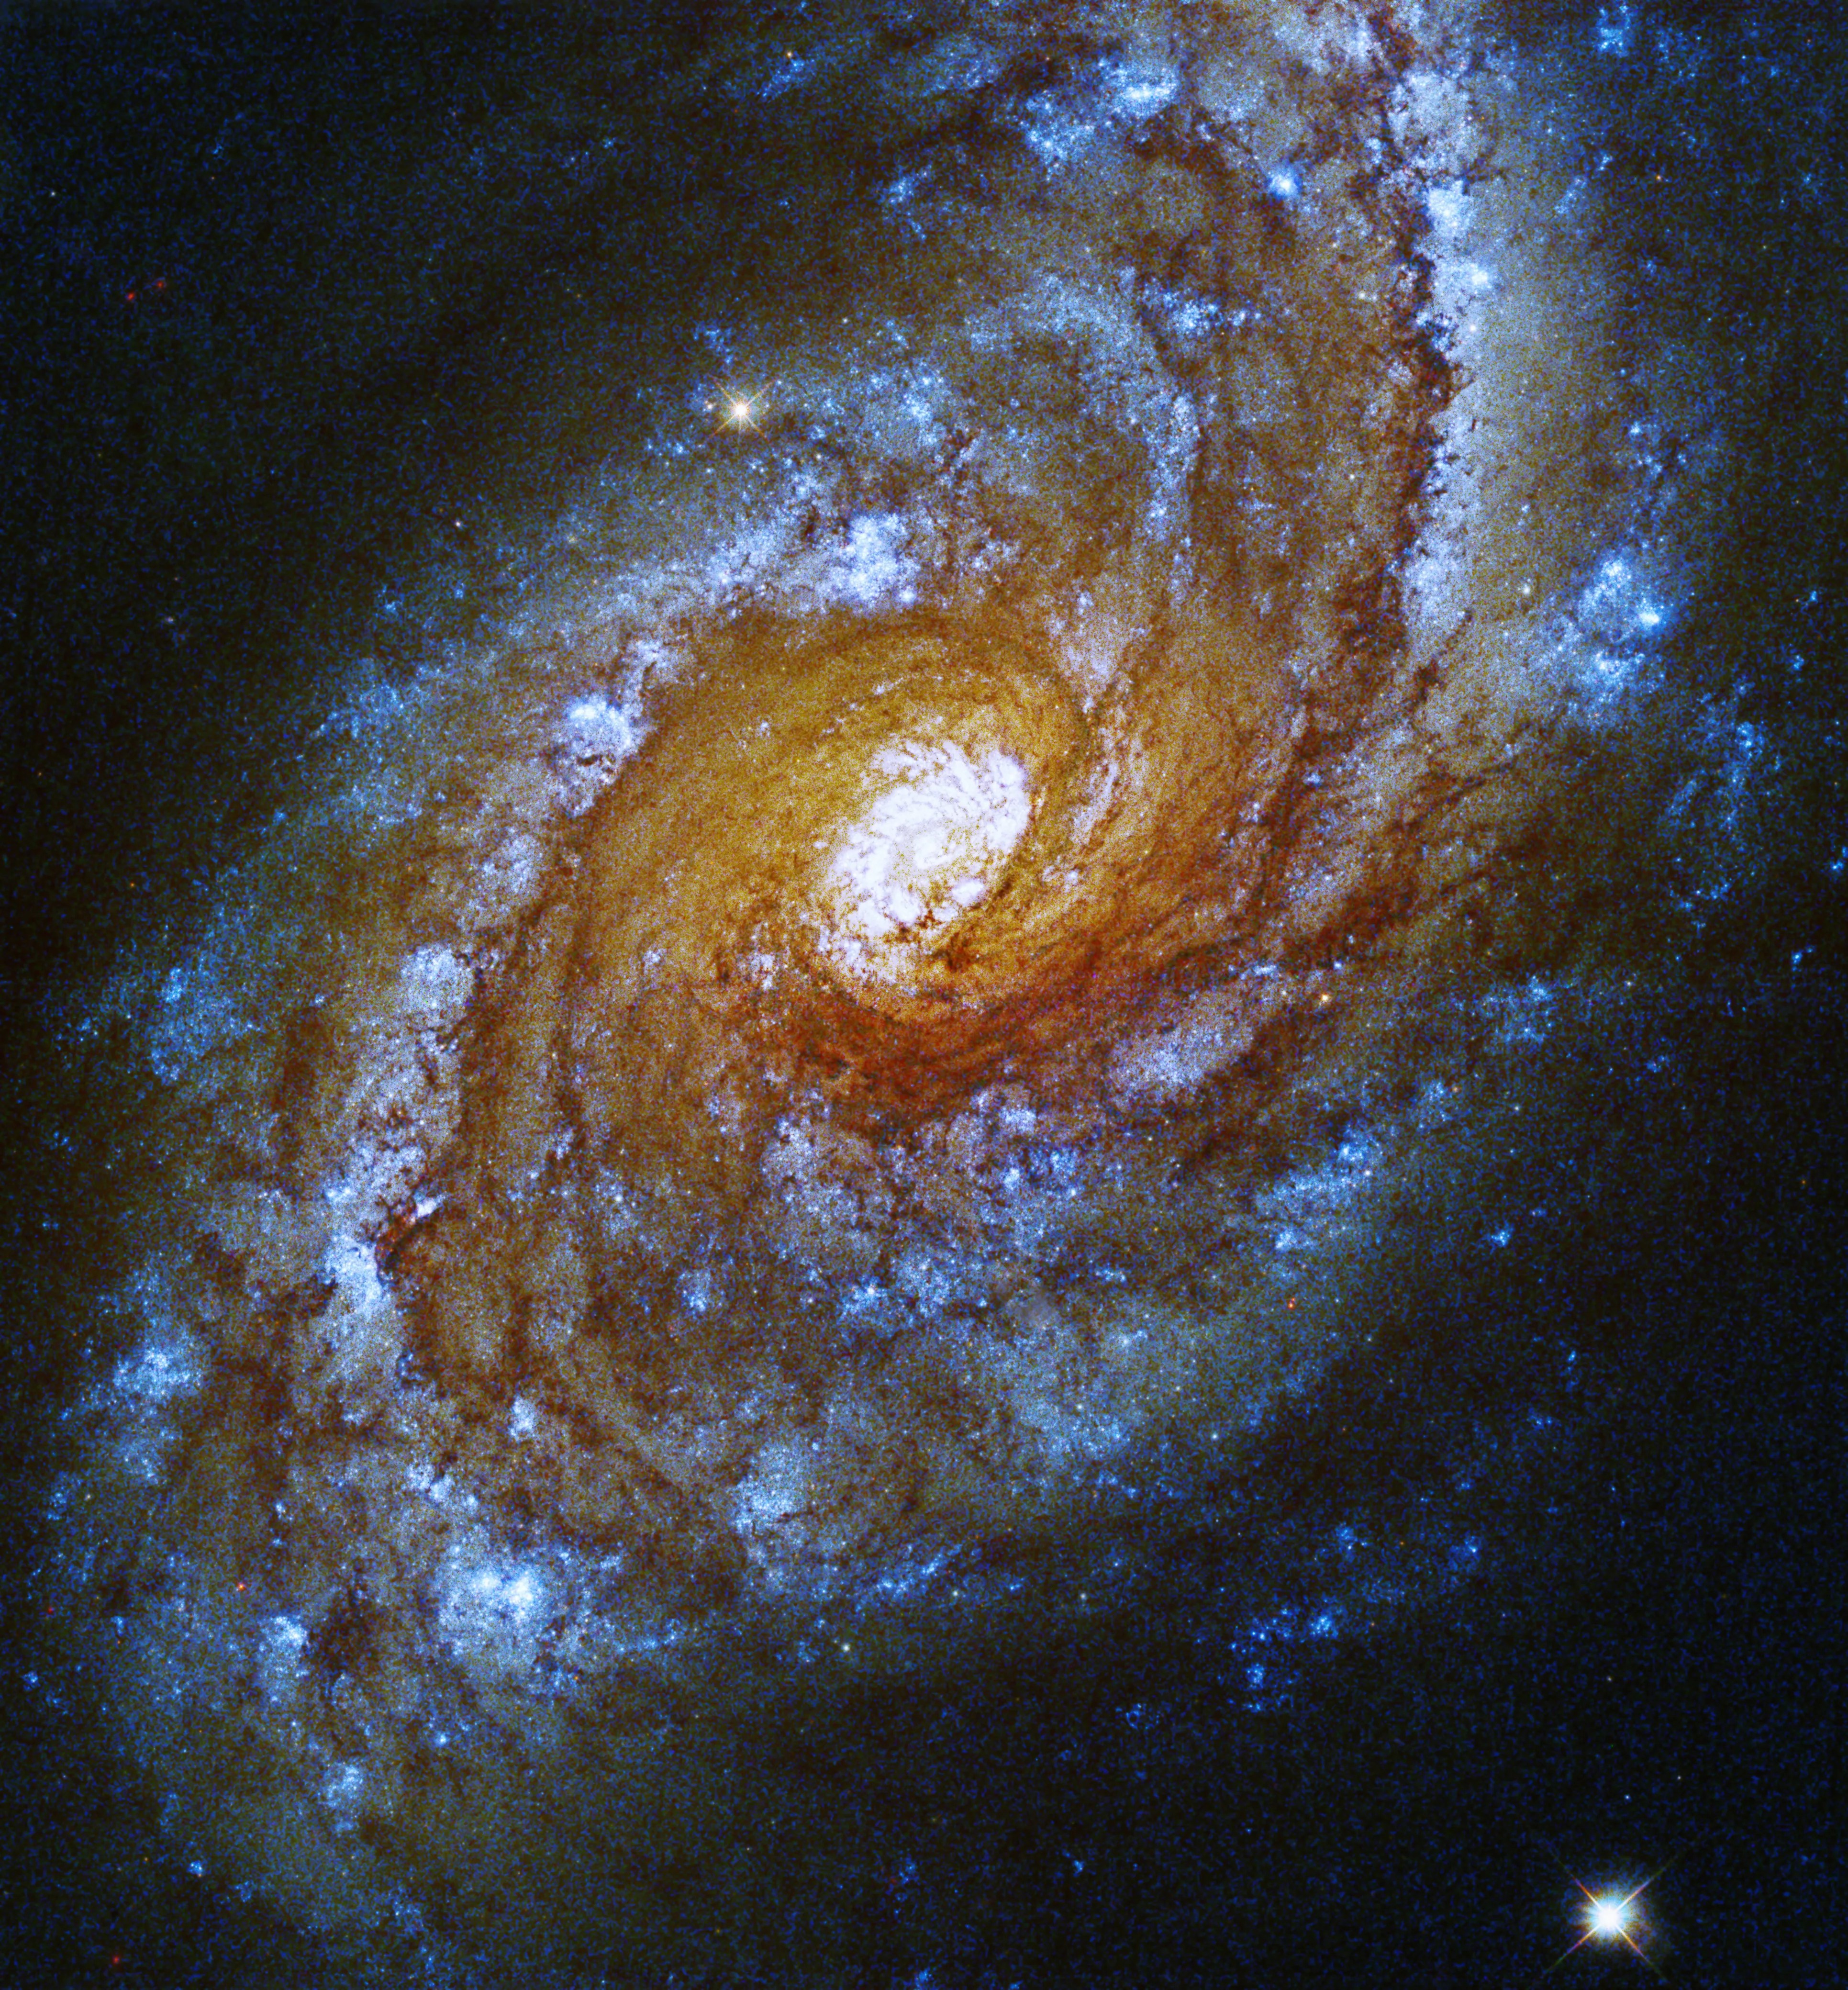 This spiral galaxy is shaped like a hurricane, with a glowing white spherical center. The arms of gas and dust closest to the center are orange, red, brown, and pale yellow in color. Farther away from the center, the arms are layers of brown and blue.